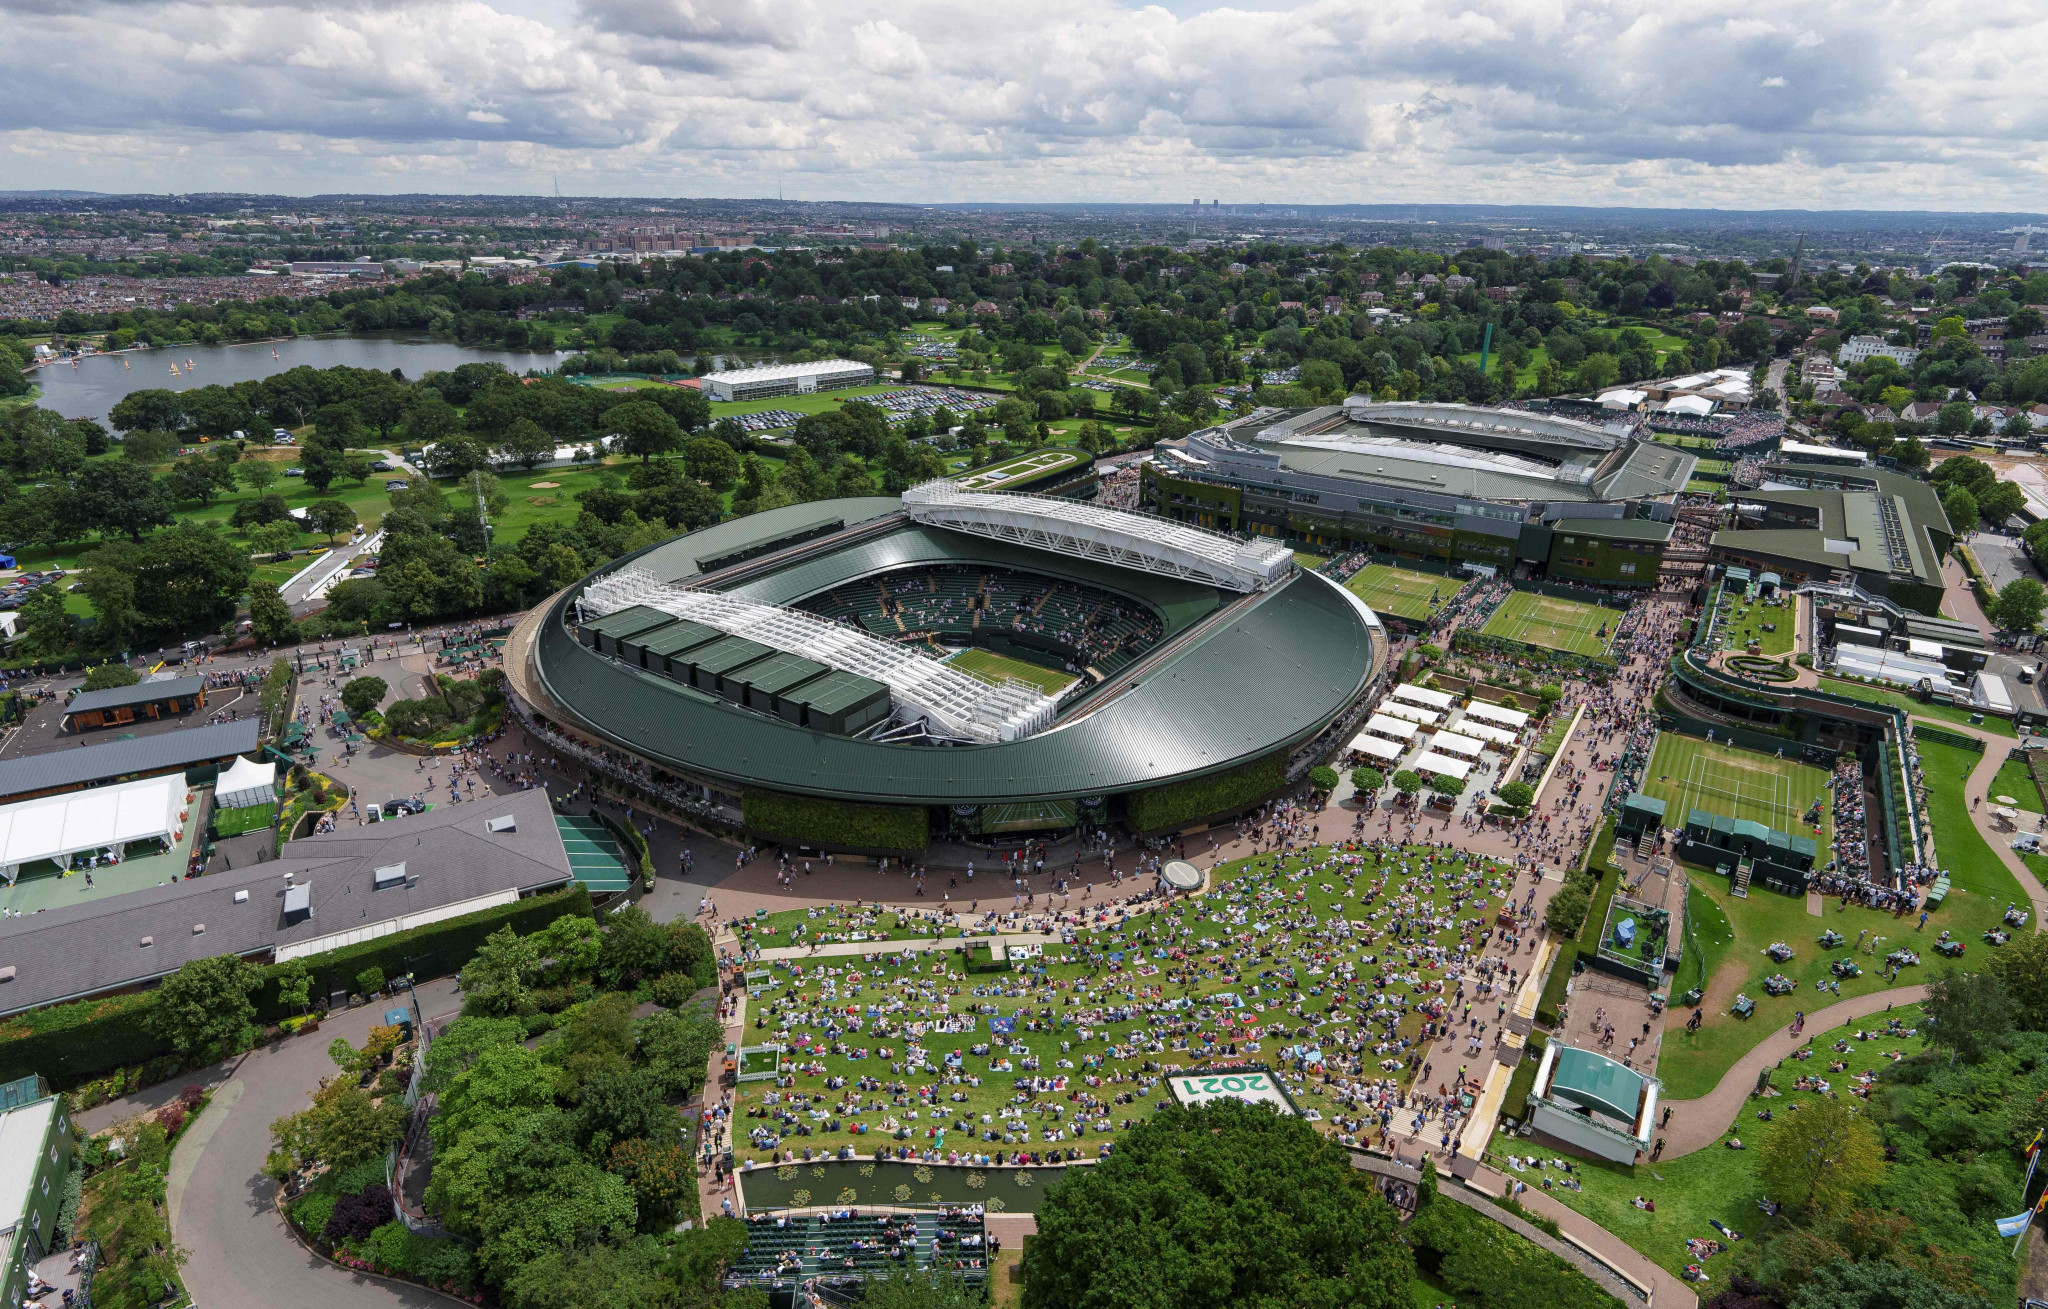 The All England Club have have revealed they plan on expanding Wimbledon by including more public parkland for fans. GETTY IMAGES